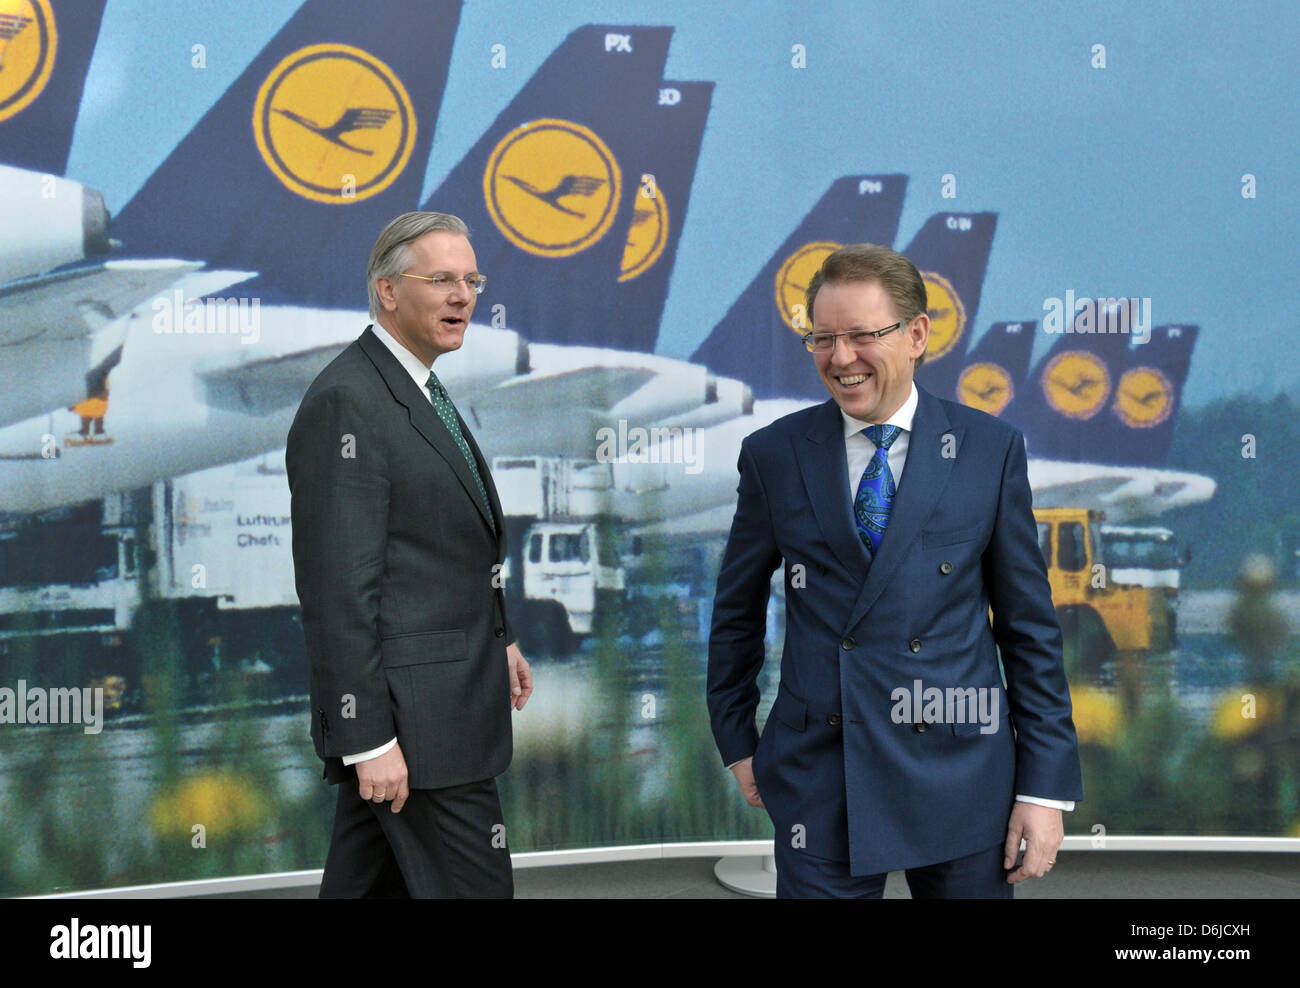 Lufthansa AG CEO, Christoph Franz (R), and managing board member Stephan Gemkow stand in front of a photo wall showing Lufthansa aircrafts during the Lufthansa financial statement press conference in Frankfurt/Main, Germany, 15 March 2012. Photo: BORIS ROESSLER Stock Photo